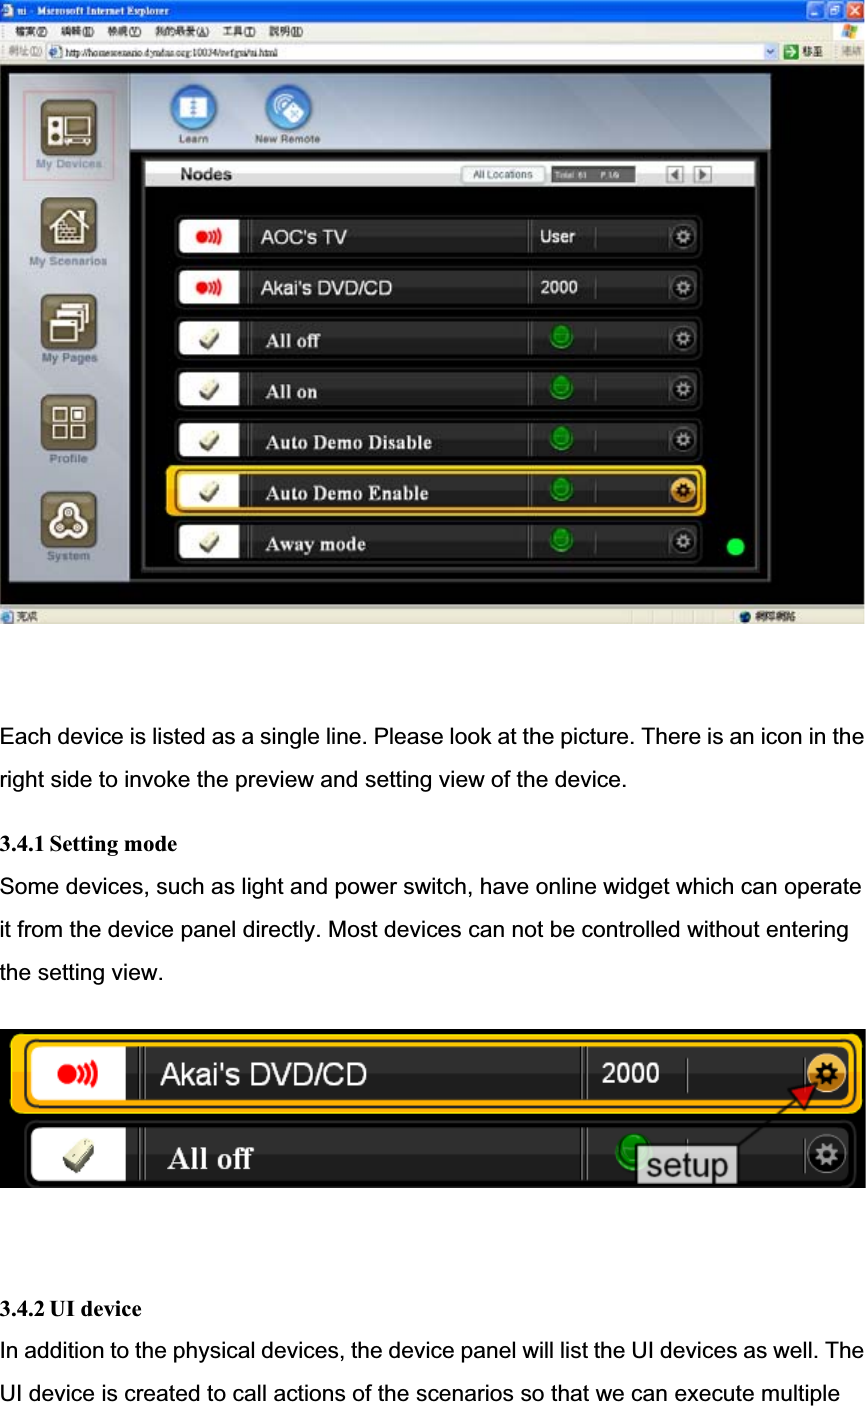 Each device is listed as a single line. Please look at the picture. There is an icon in theright side to invoke the preview and setting view of the device. 3.4.1 Setting modeSome devices, such as light and power switch, have online widget which can operateit from the device panel directly. Most devices can not be controlled without entering the setting view. 3.4.2 UI deviceIn addition to the physical devices, the device panel will list the UI devices as well. TheUI device is created to call actions of the scenarios so that we can execute multiple 